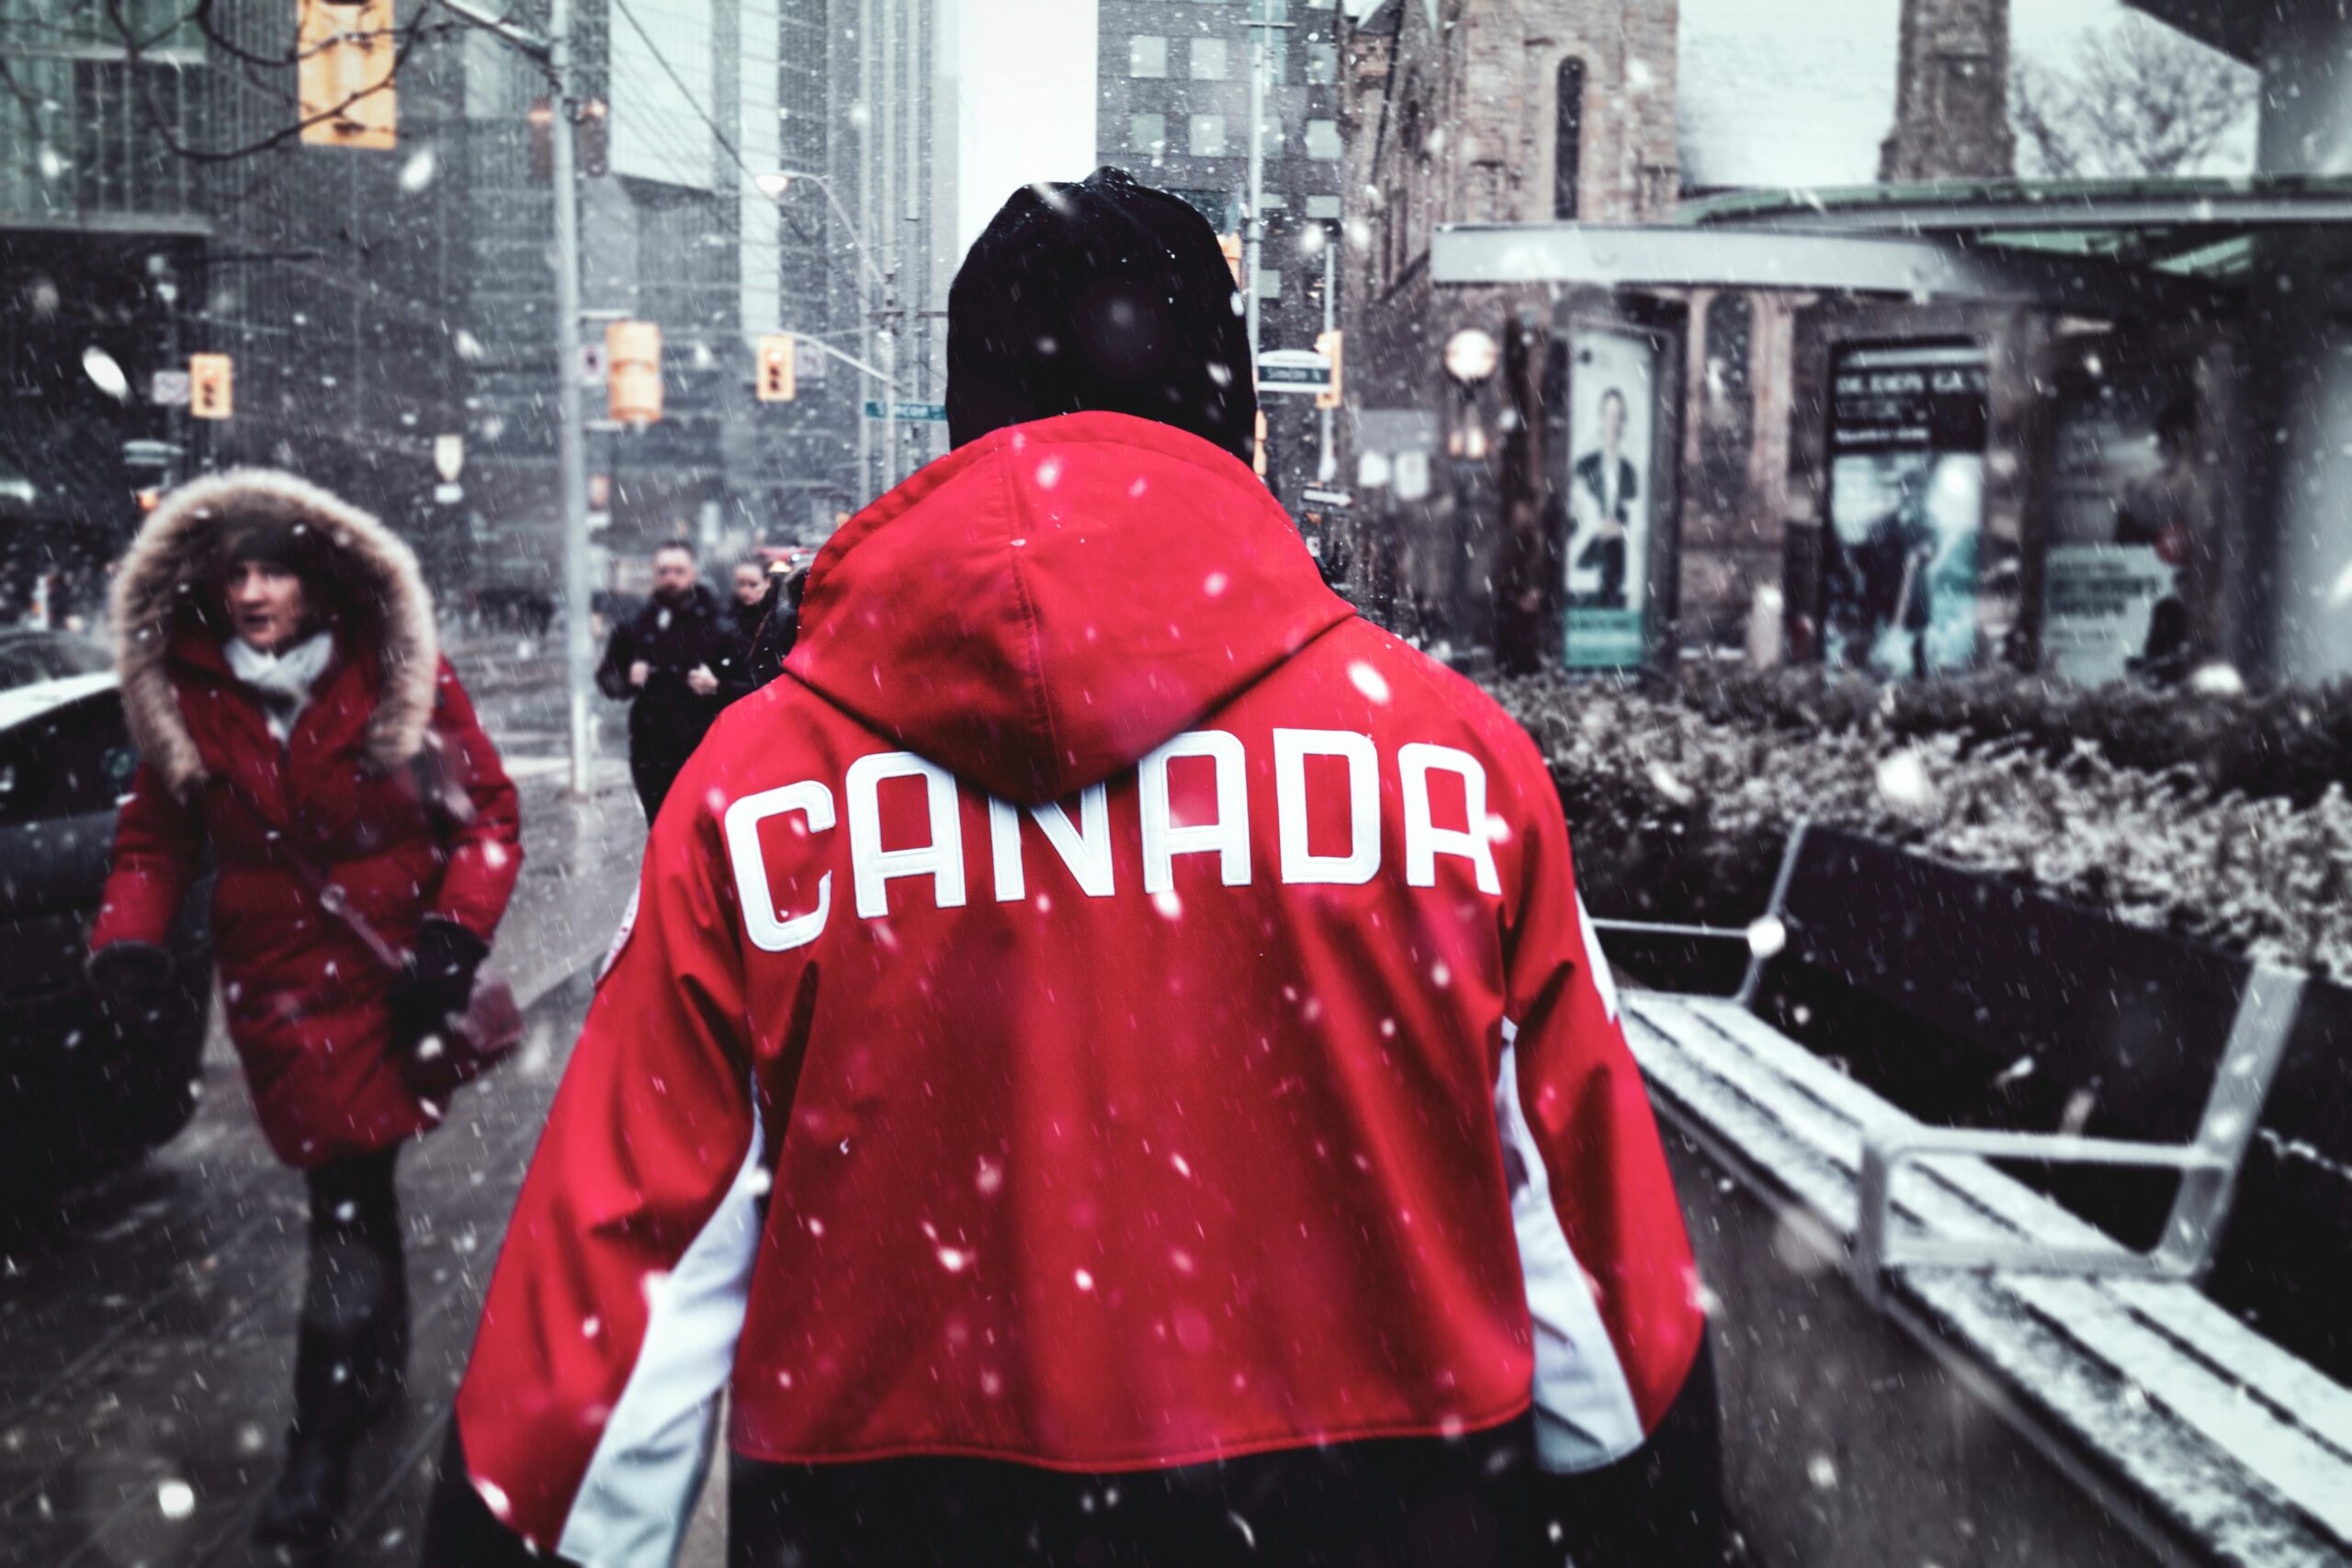 Explore Canada: Work, Life & Jobs in the Land of Maple Leafs